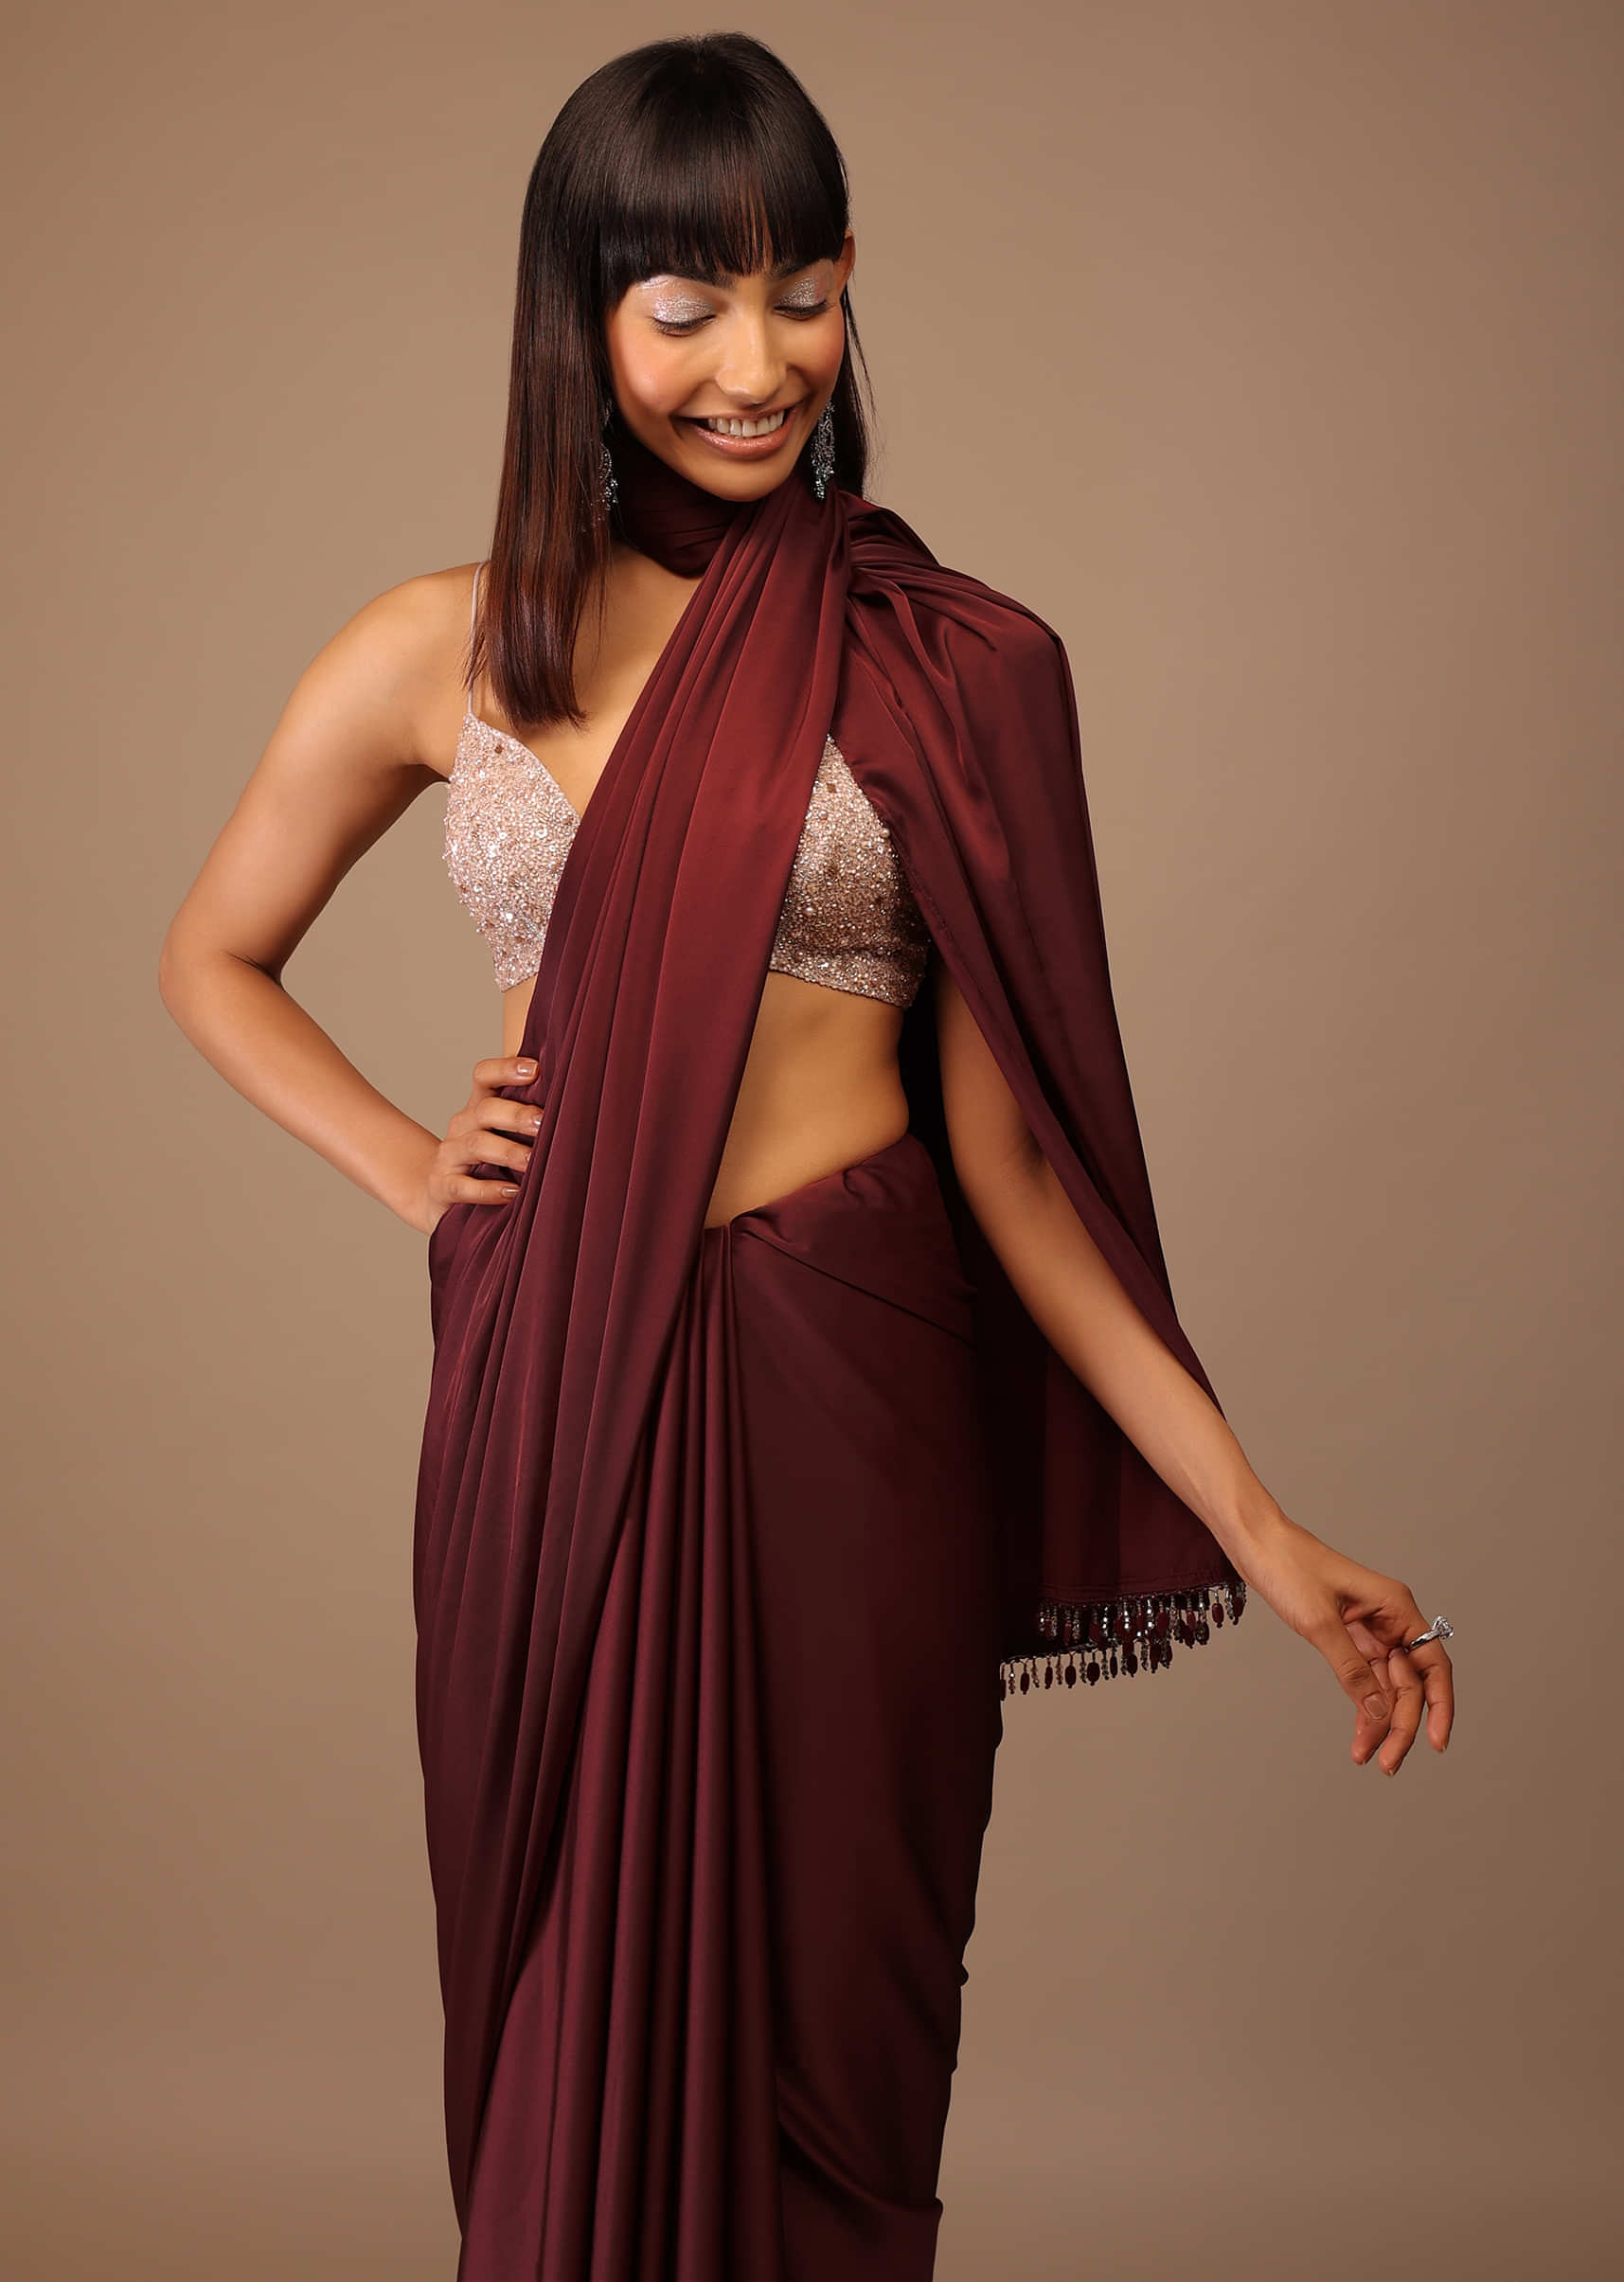 Blood Red Satin Saree With Fringes On The Pallu Paired With Hand Embroidered Bustier